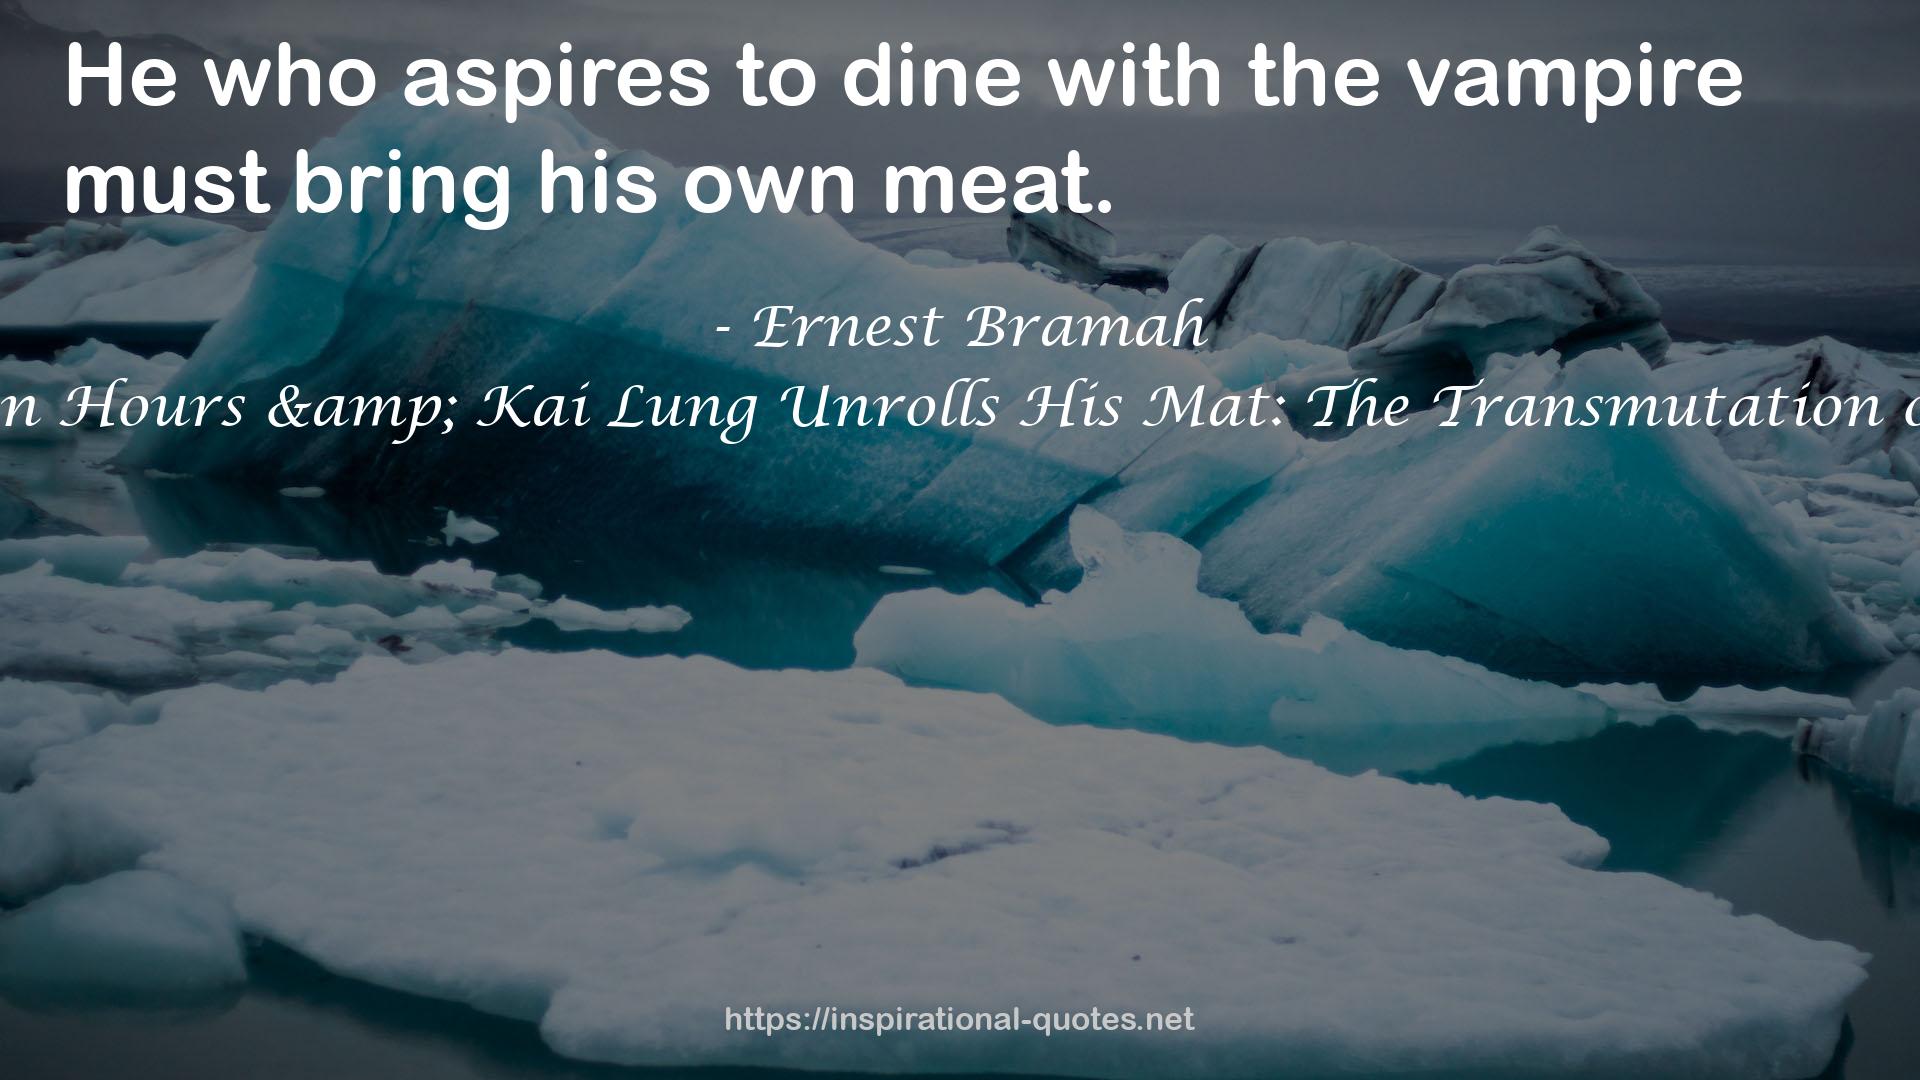 THE KAI LUNG FANTASY SERIES: The Wallet of Kai Lung, Kai Lung's Golden Hours & Kai Lung Unrolls His Mat: The Transmutation of Ling, The Story of Yung Chang, ... Lung, The Vengeance of Tung Fel and more QUOTES